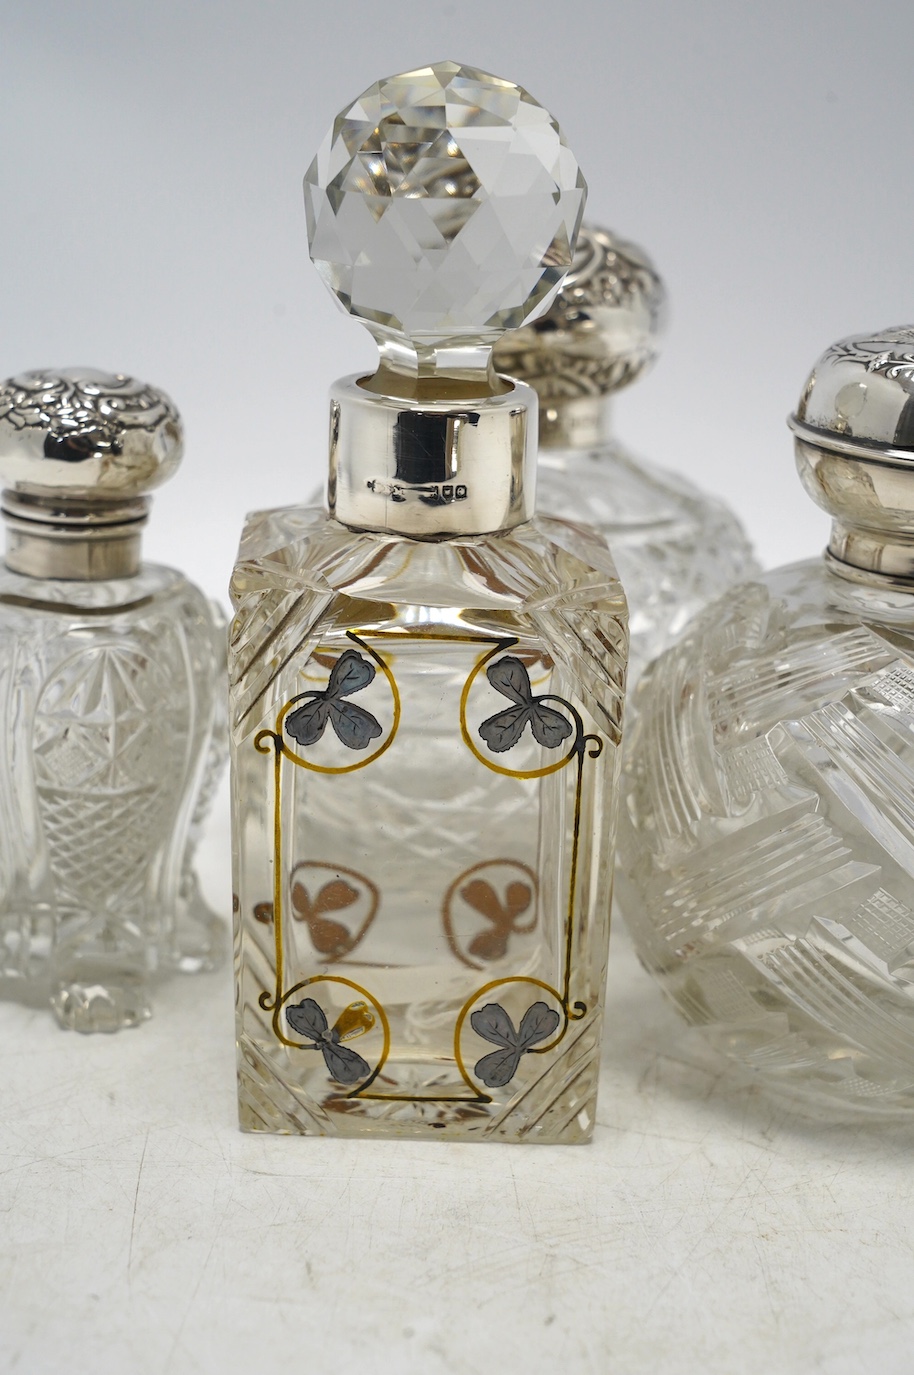 Four assorted early 20th century silver mounted glass scent bottles, tallest 16.1cm. Condition - fair